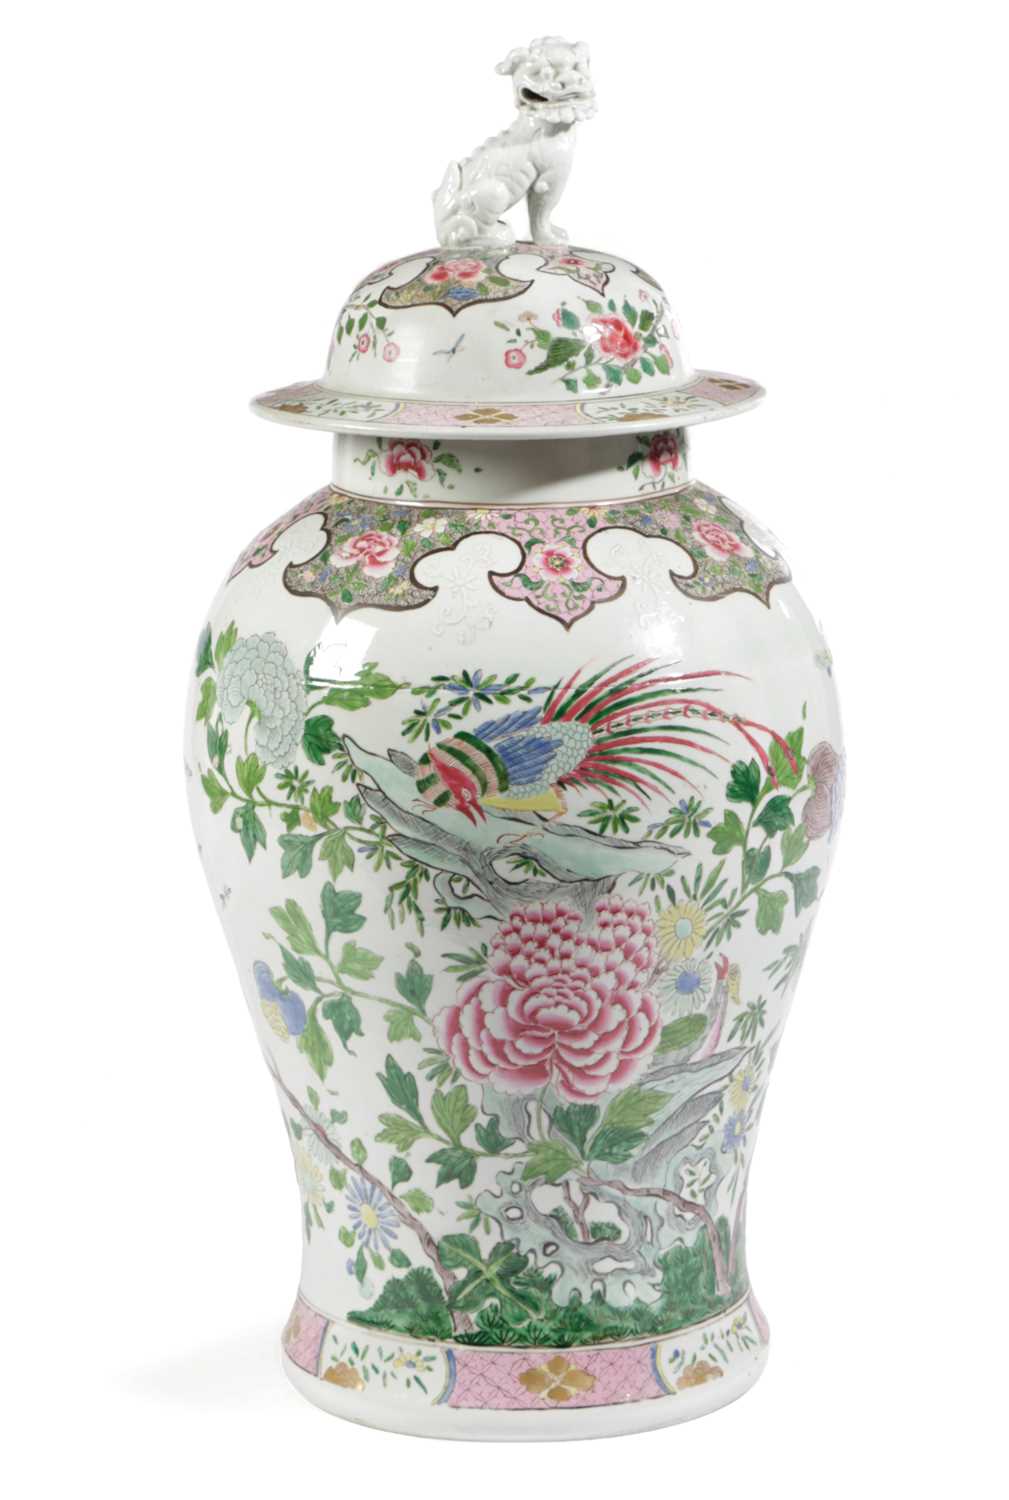 A LARGE CHINESE PORCELAIN FAMILLE ROSE VASE AND COVER 19TH CENTURY of baluster form, painted with